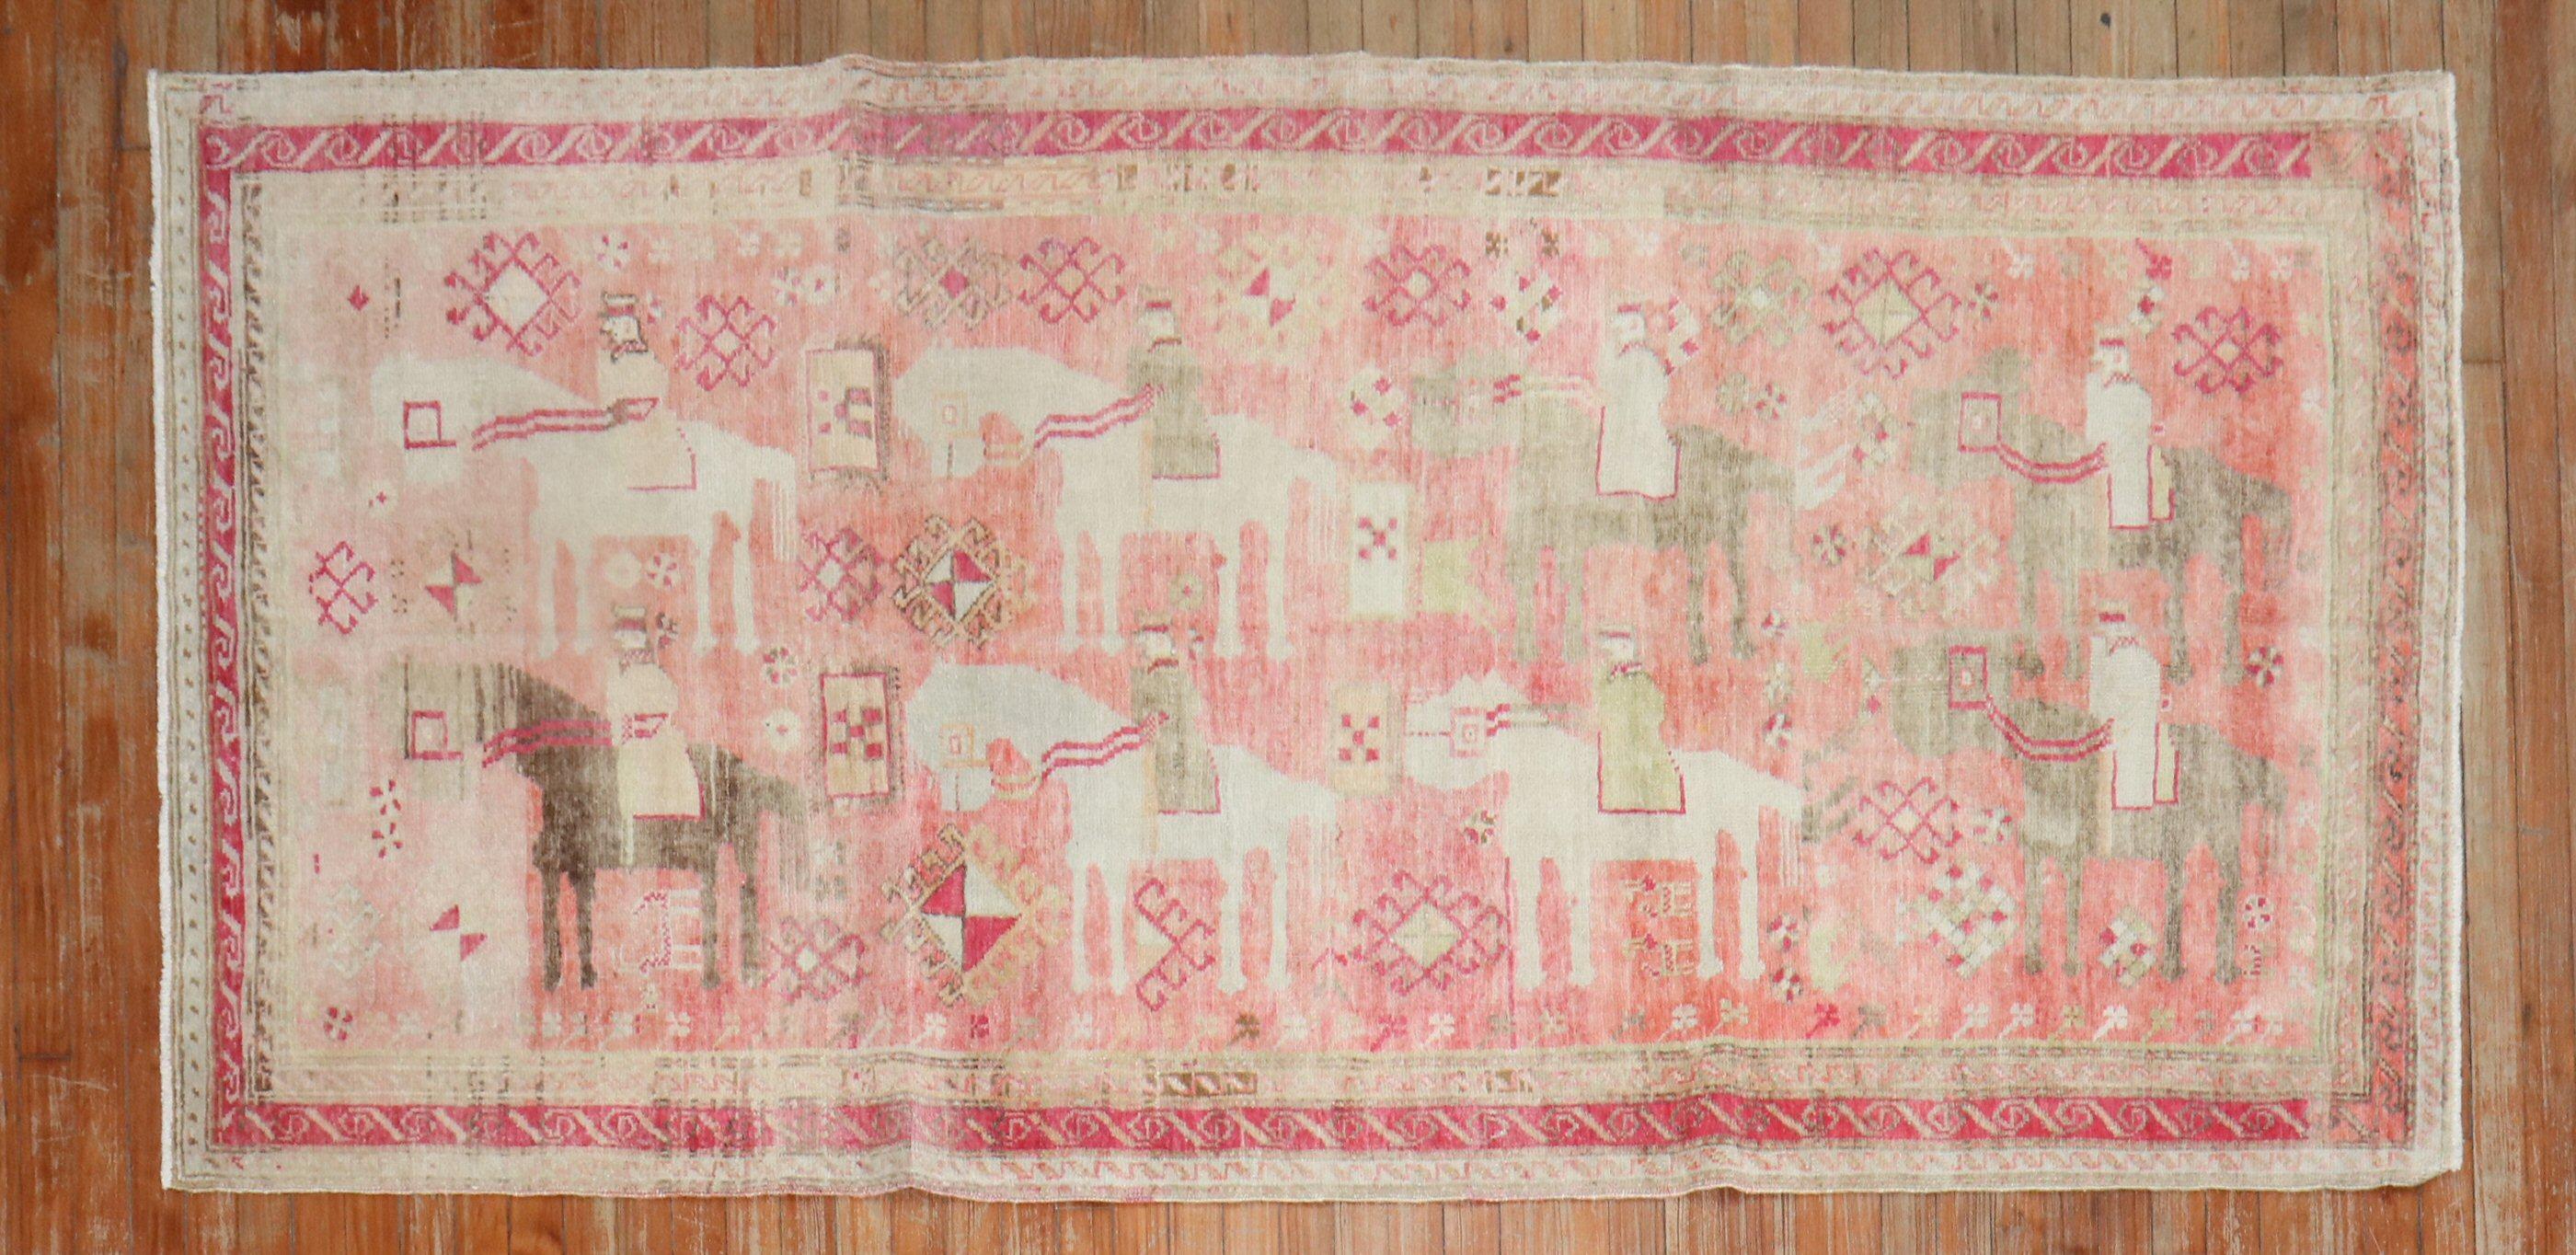 A russian Karabagh from the 2nd quarter of the 20th century with a pictorial caravan motif in pink

Measures: 3'10'' x 8'2''.